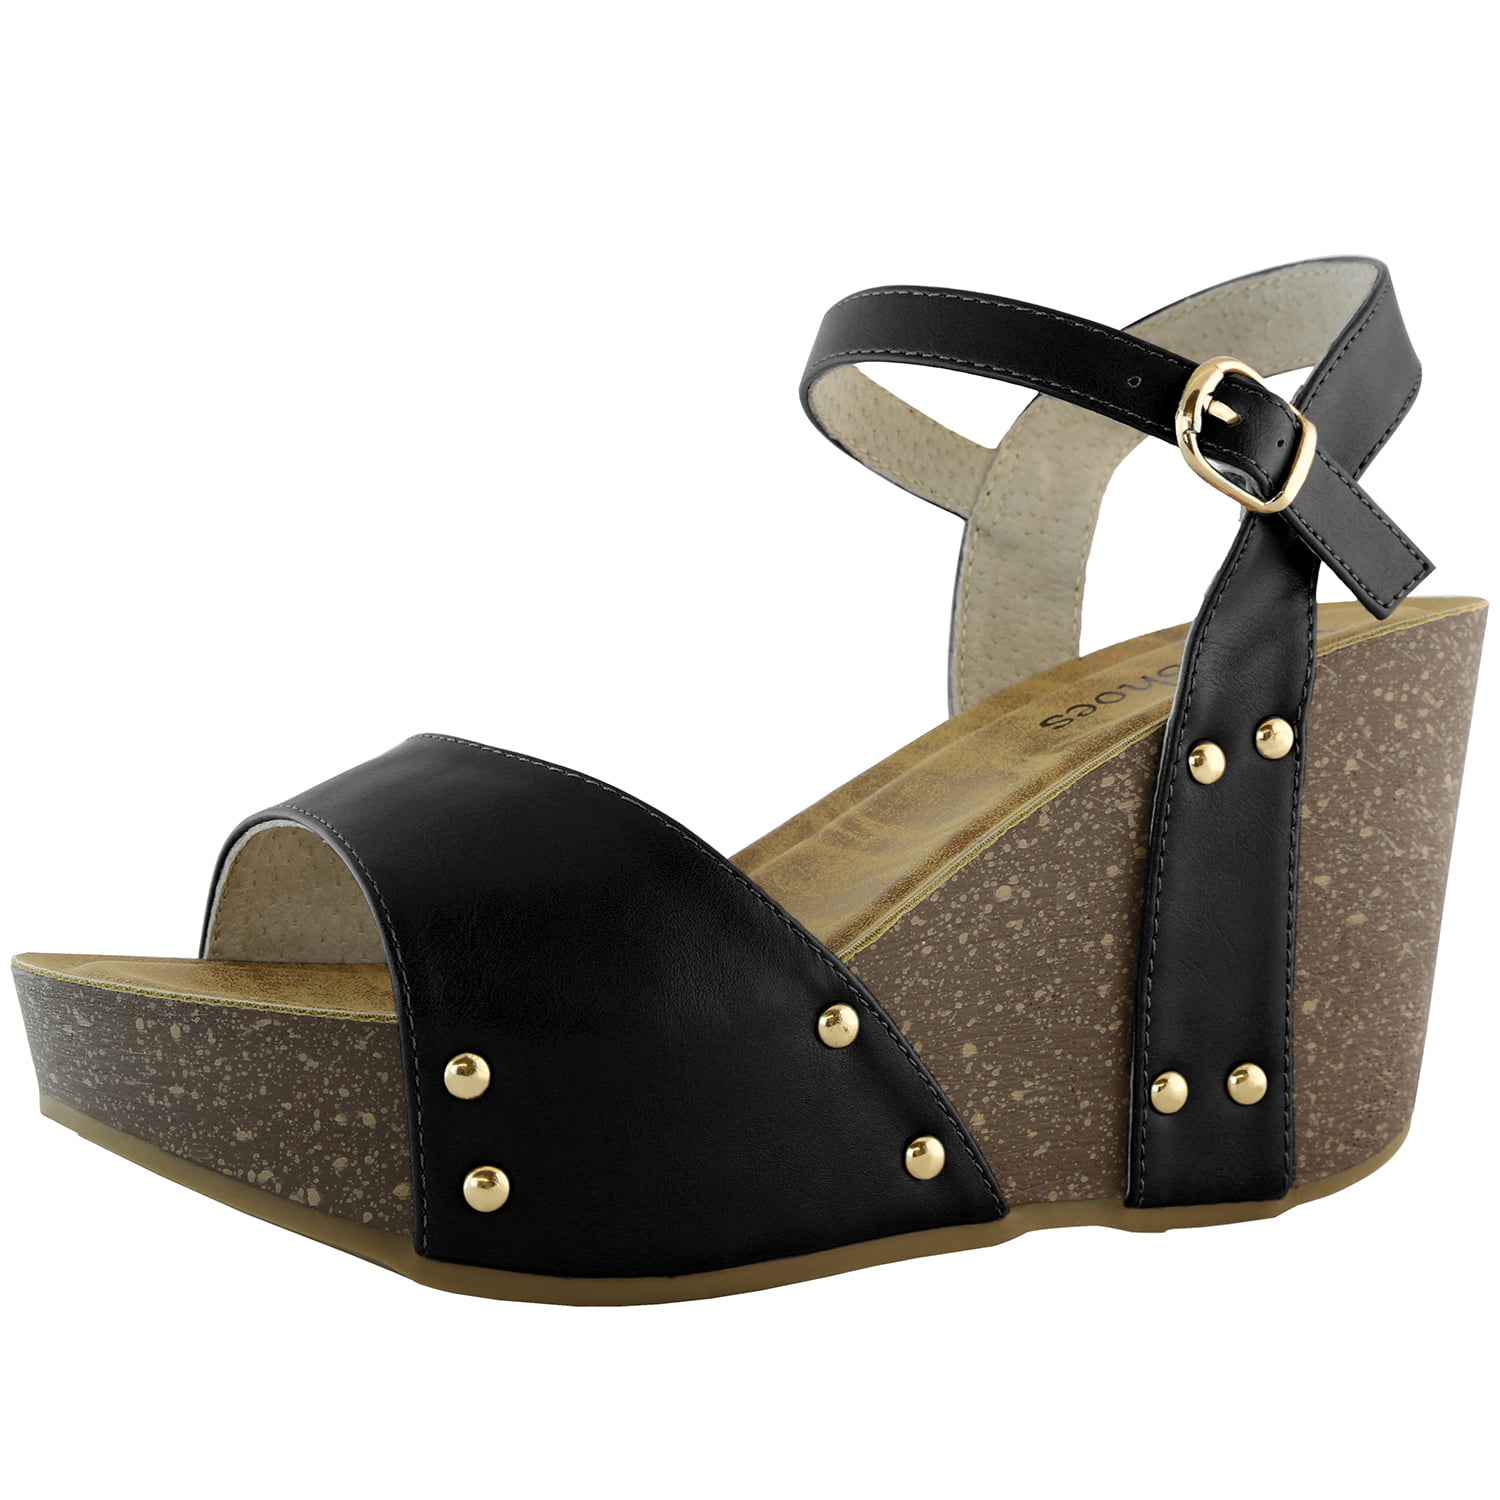 Platform Strappy Sandal With Rings and Studs Detail Details about   8 Inch Heel